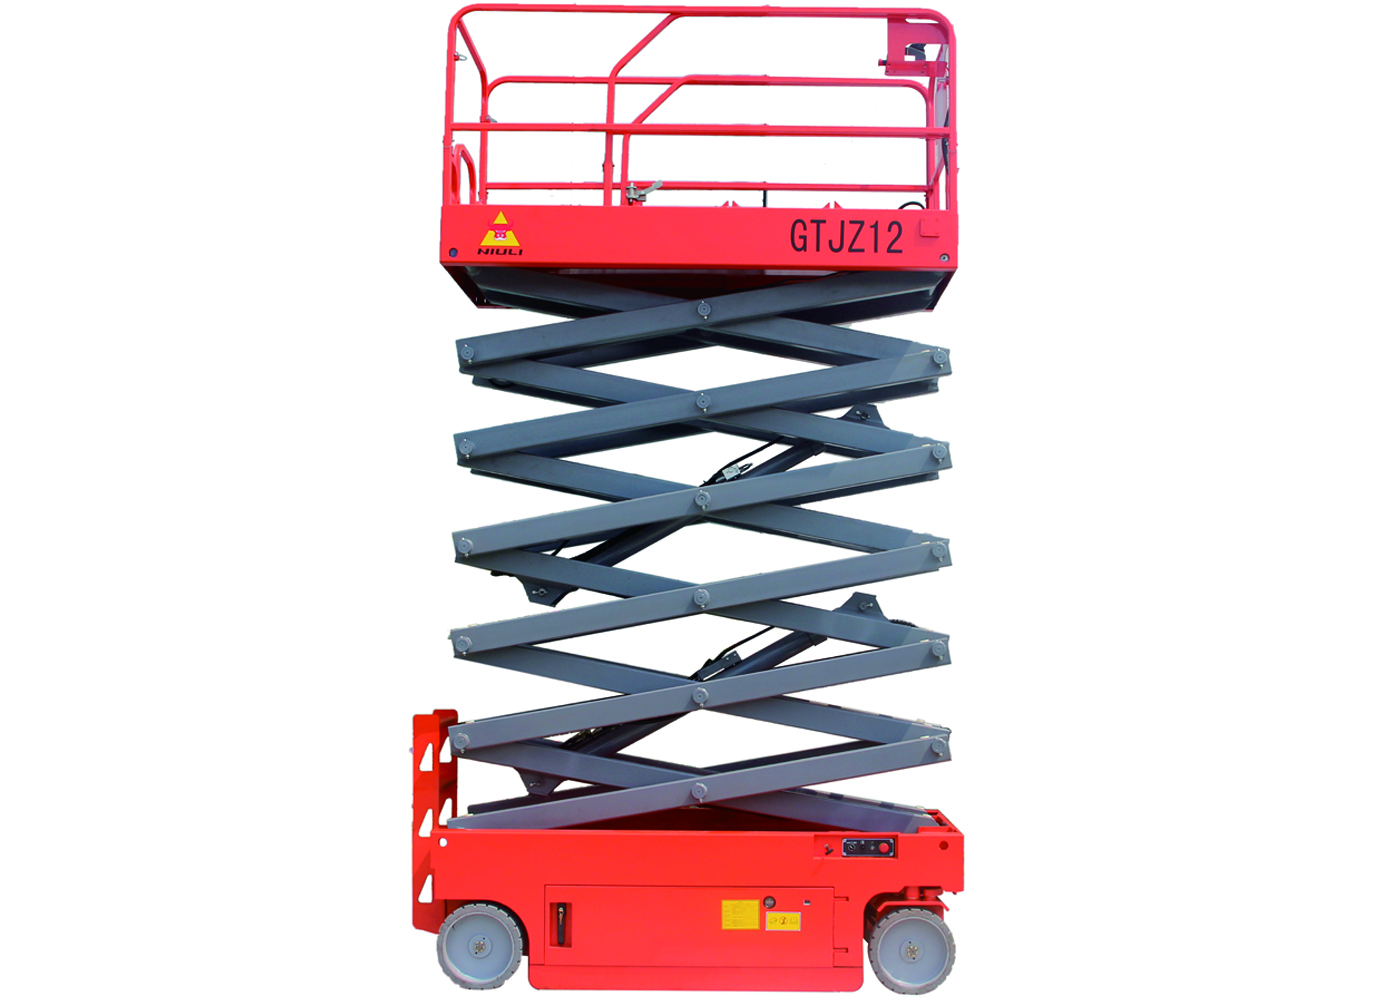 The Versatility of Scissor Lift Workbenches and Hydraulic Scissor Lift Tables